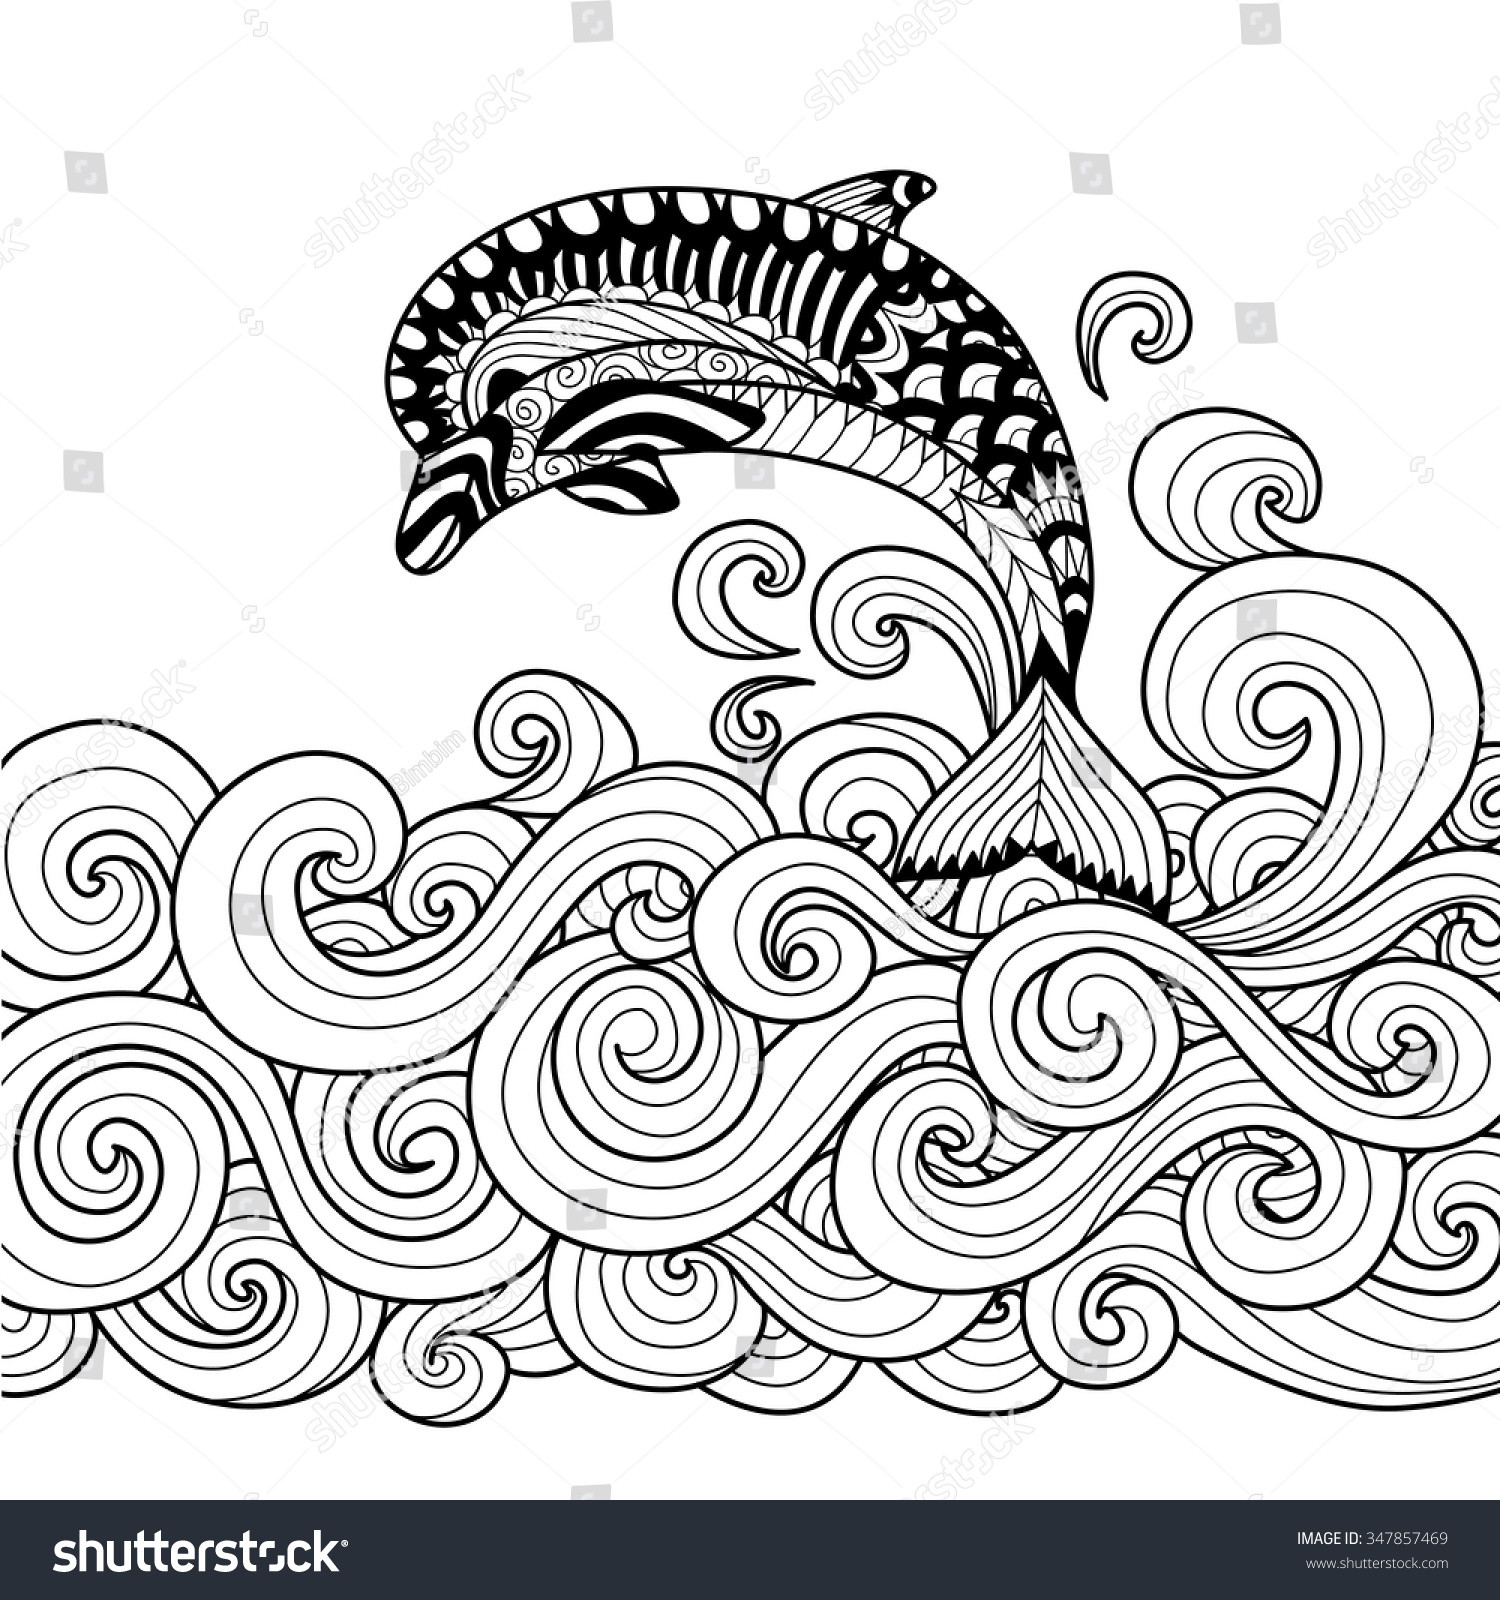 Ocean Waves Coloring Pages For Adults
 Hand Drawn Zentangle Dolphin Scrolling Sea Stock Vector